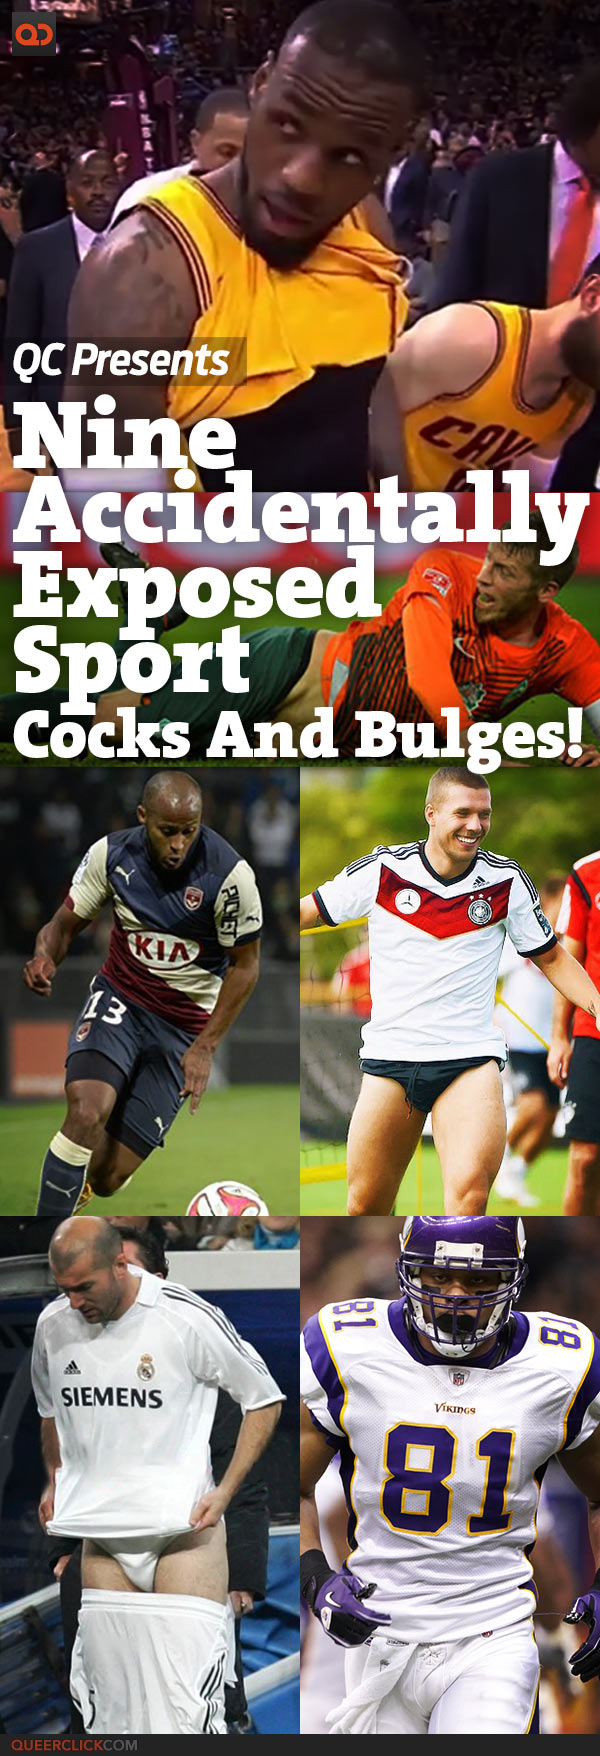 QC's 9 Accidentally Exposed Sport Cocks And Bulges!